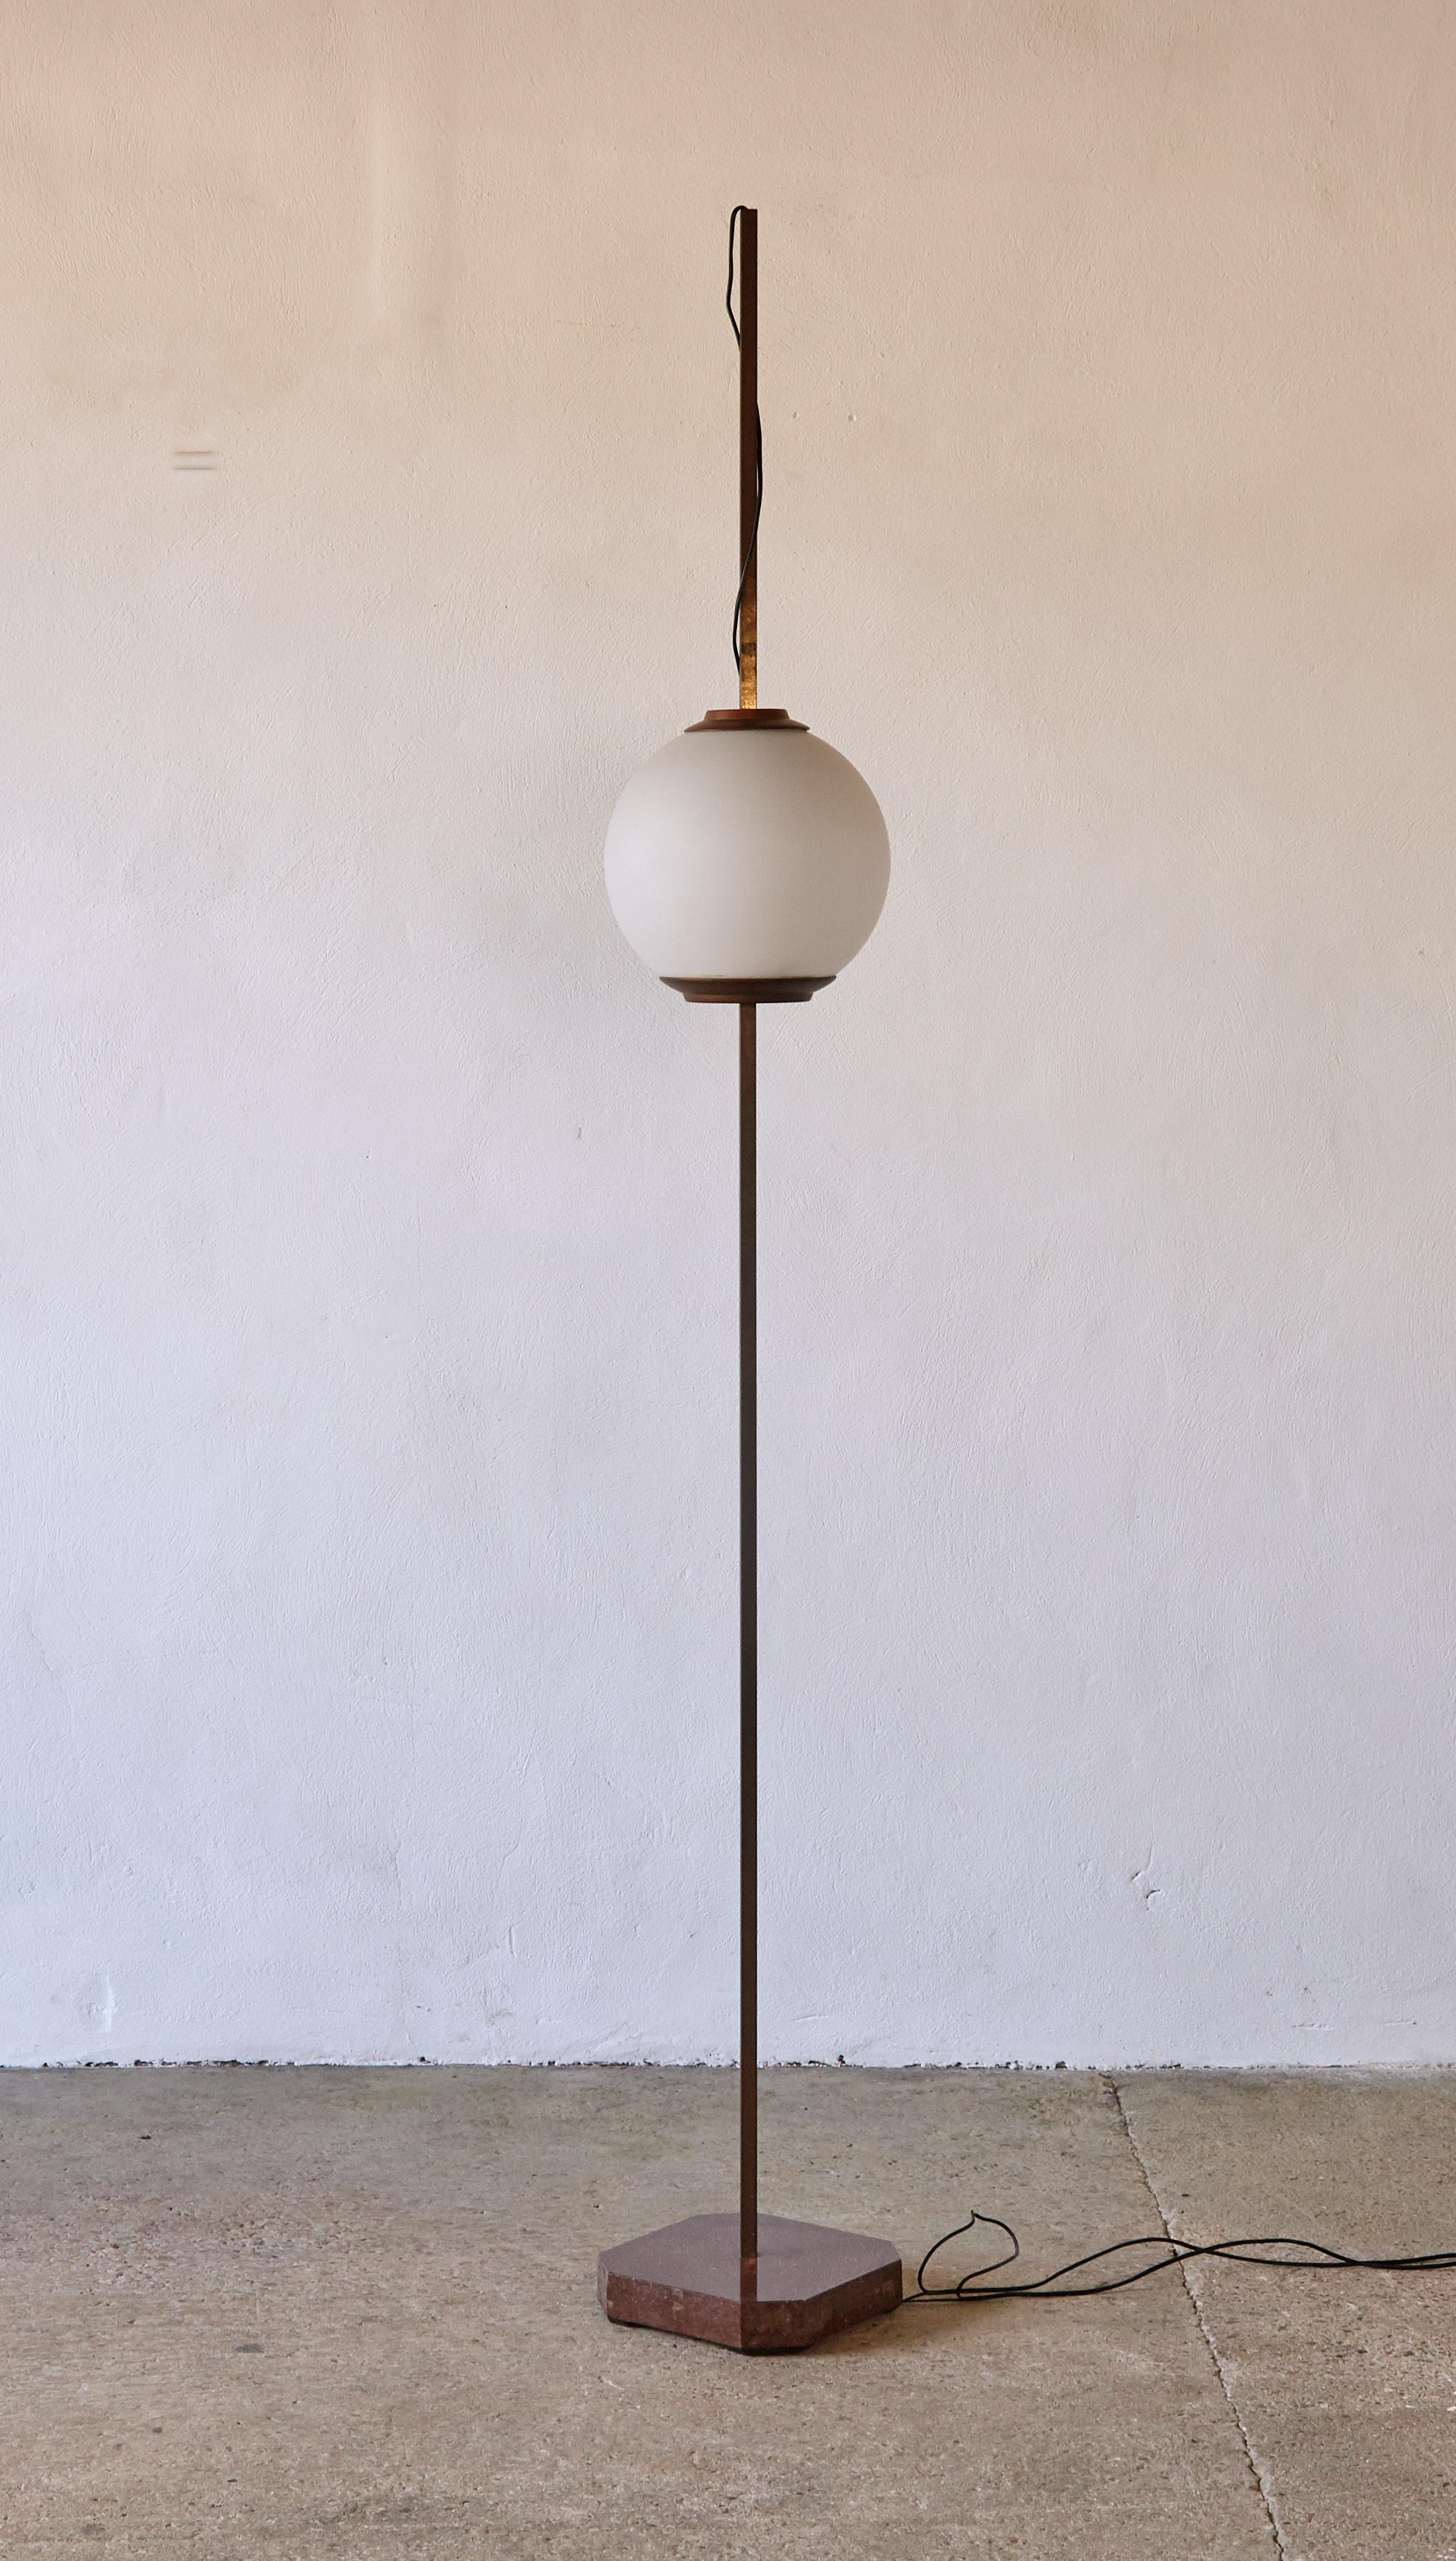 An elegant Luigi Caccia Dominioni LTE 10 Pallone floor lamp, made by Azucena, from Italy in the 1950s. With a marble base, brass frame and opaline glass shade. In good original vintage condition with signs of age. In working condition but requires